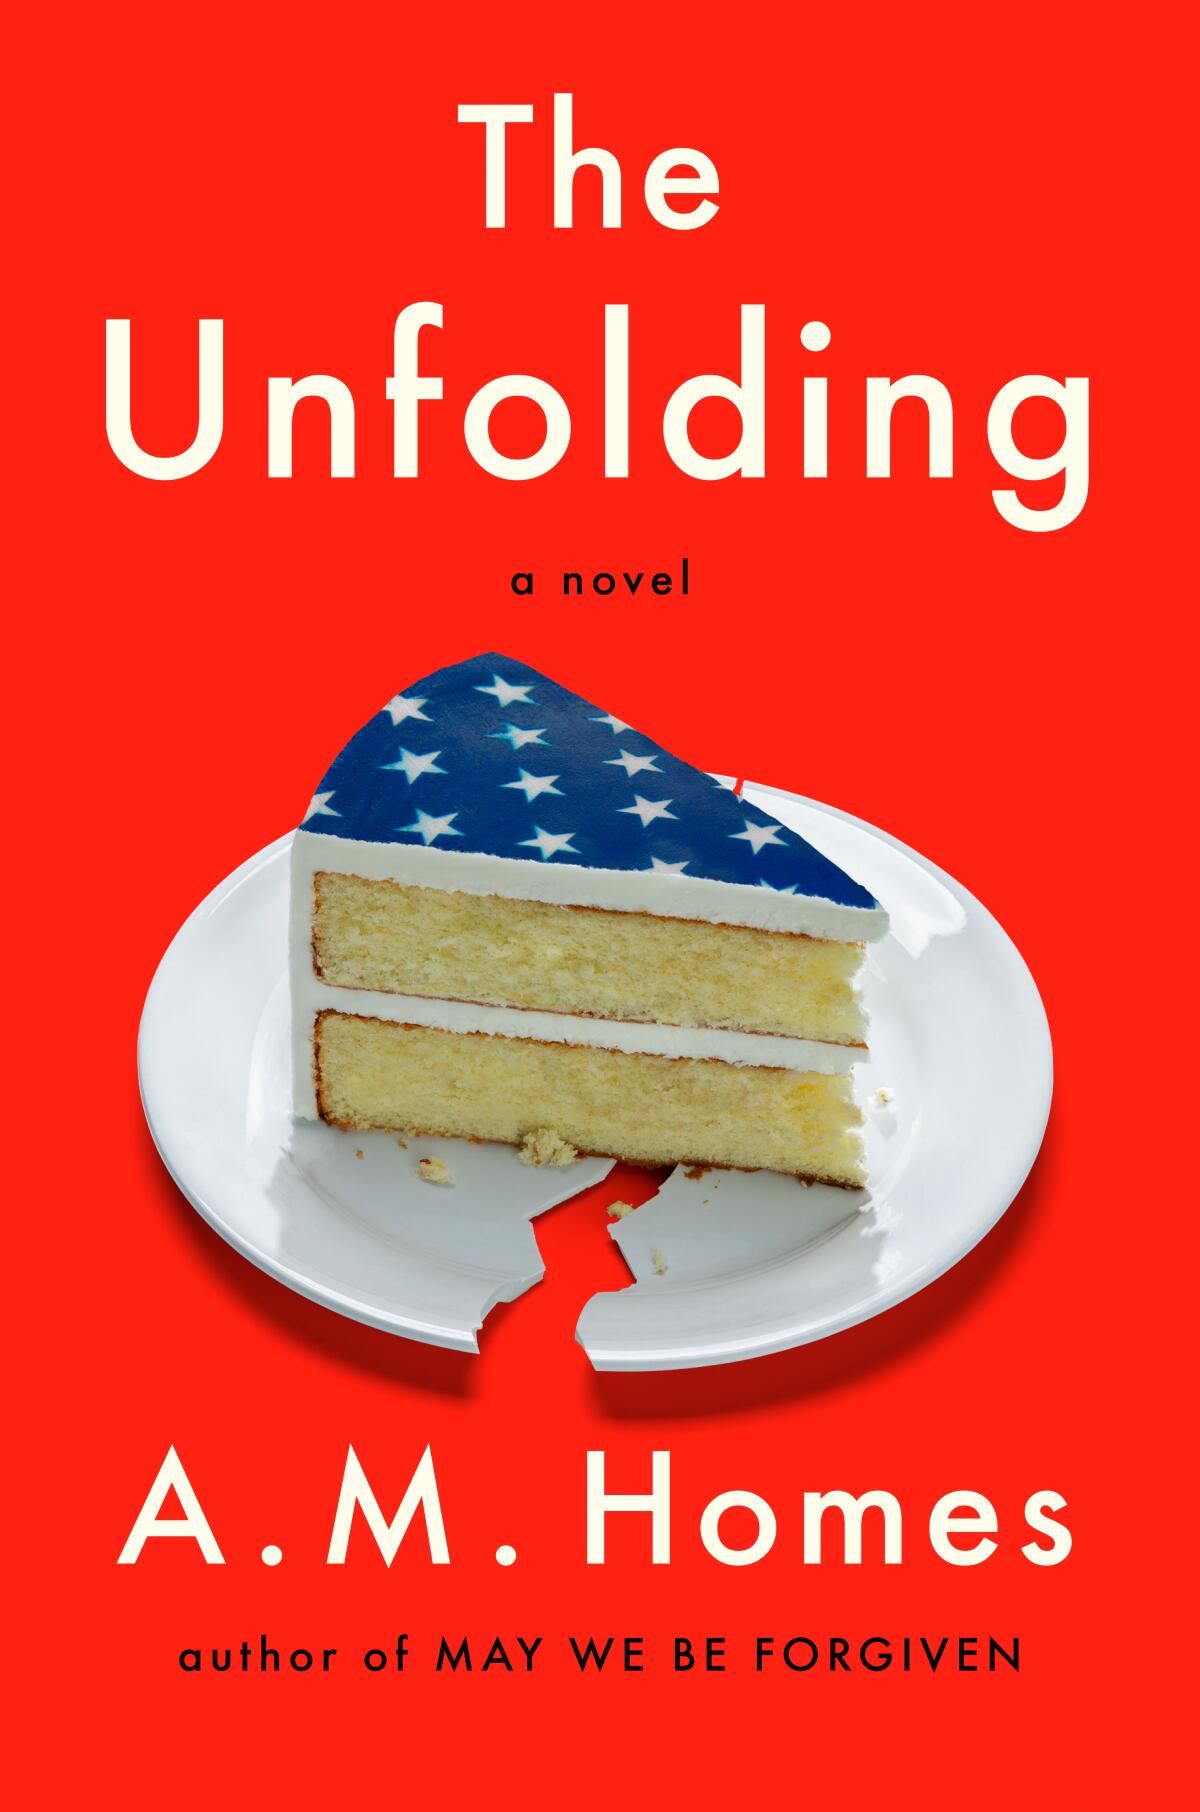 book cover has cake slice with stars on top on a broken plate 